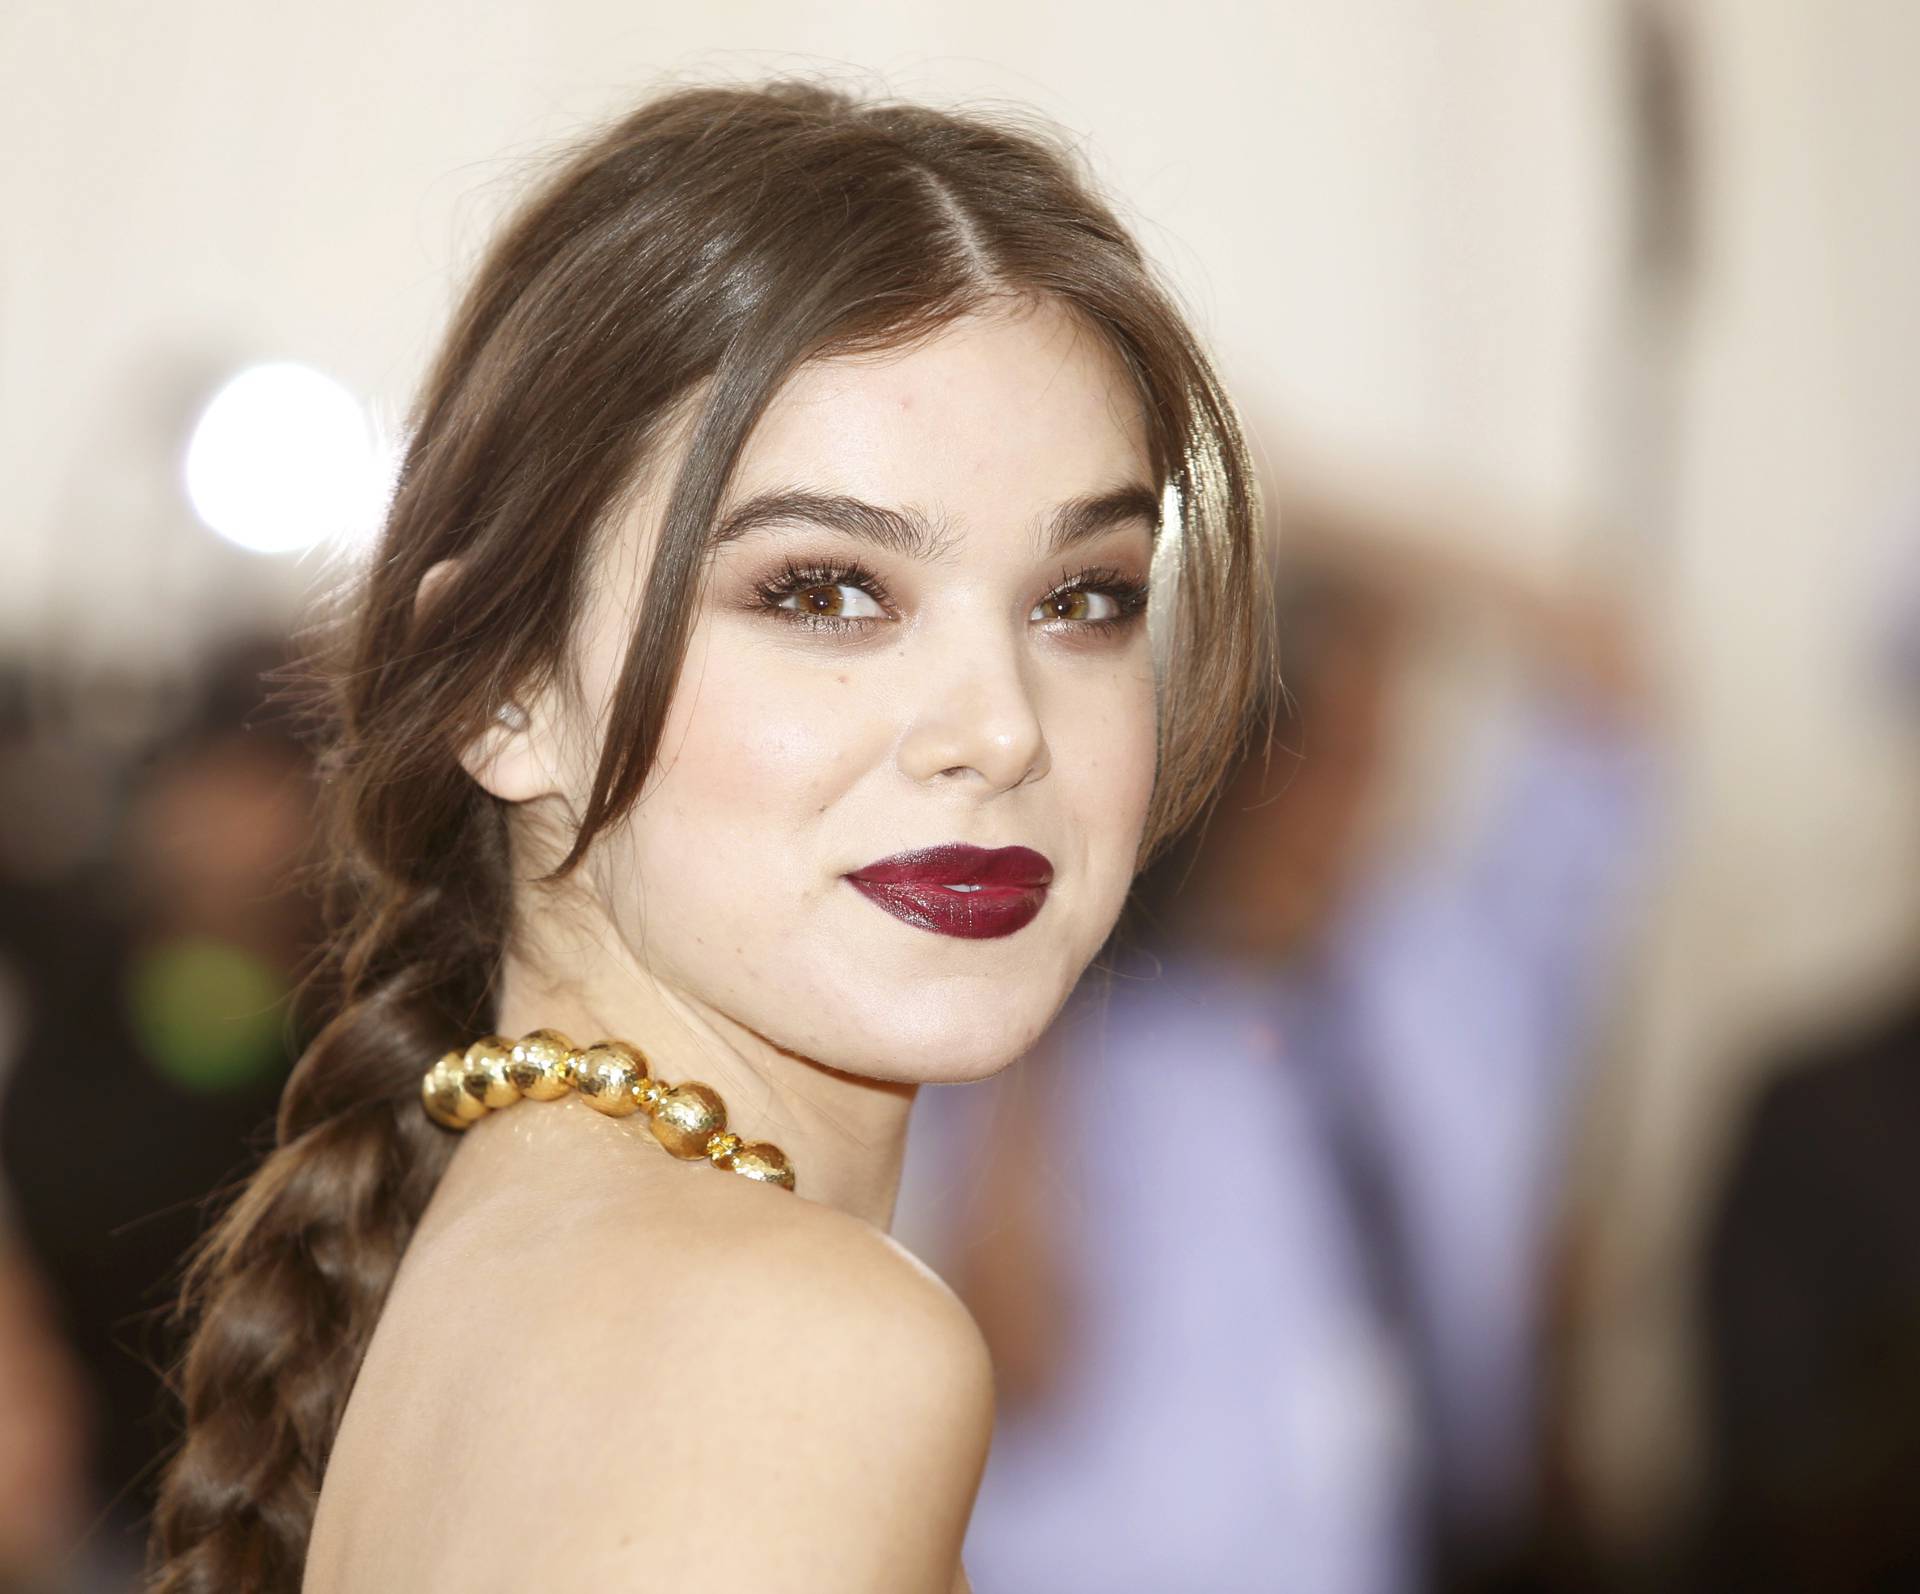 Actress Hailee Steinfeld arrives at the Met Gala in New York